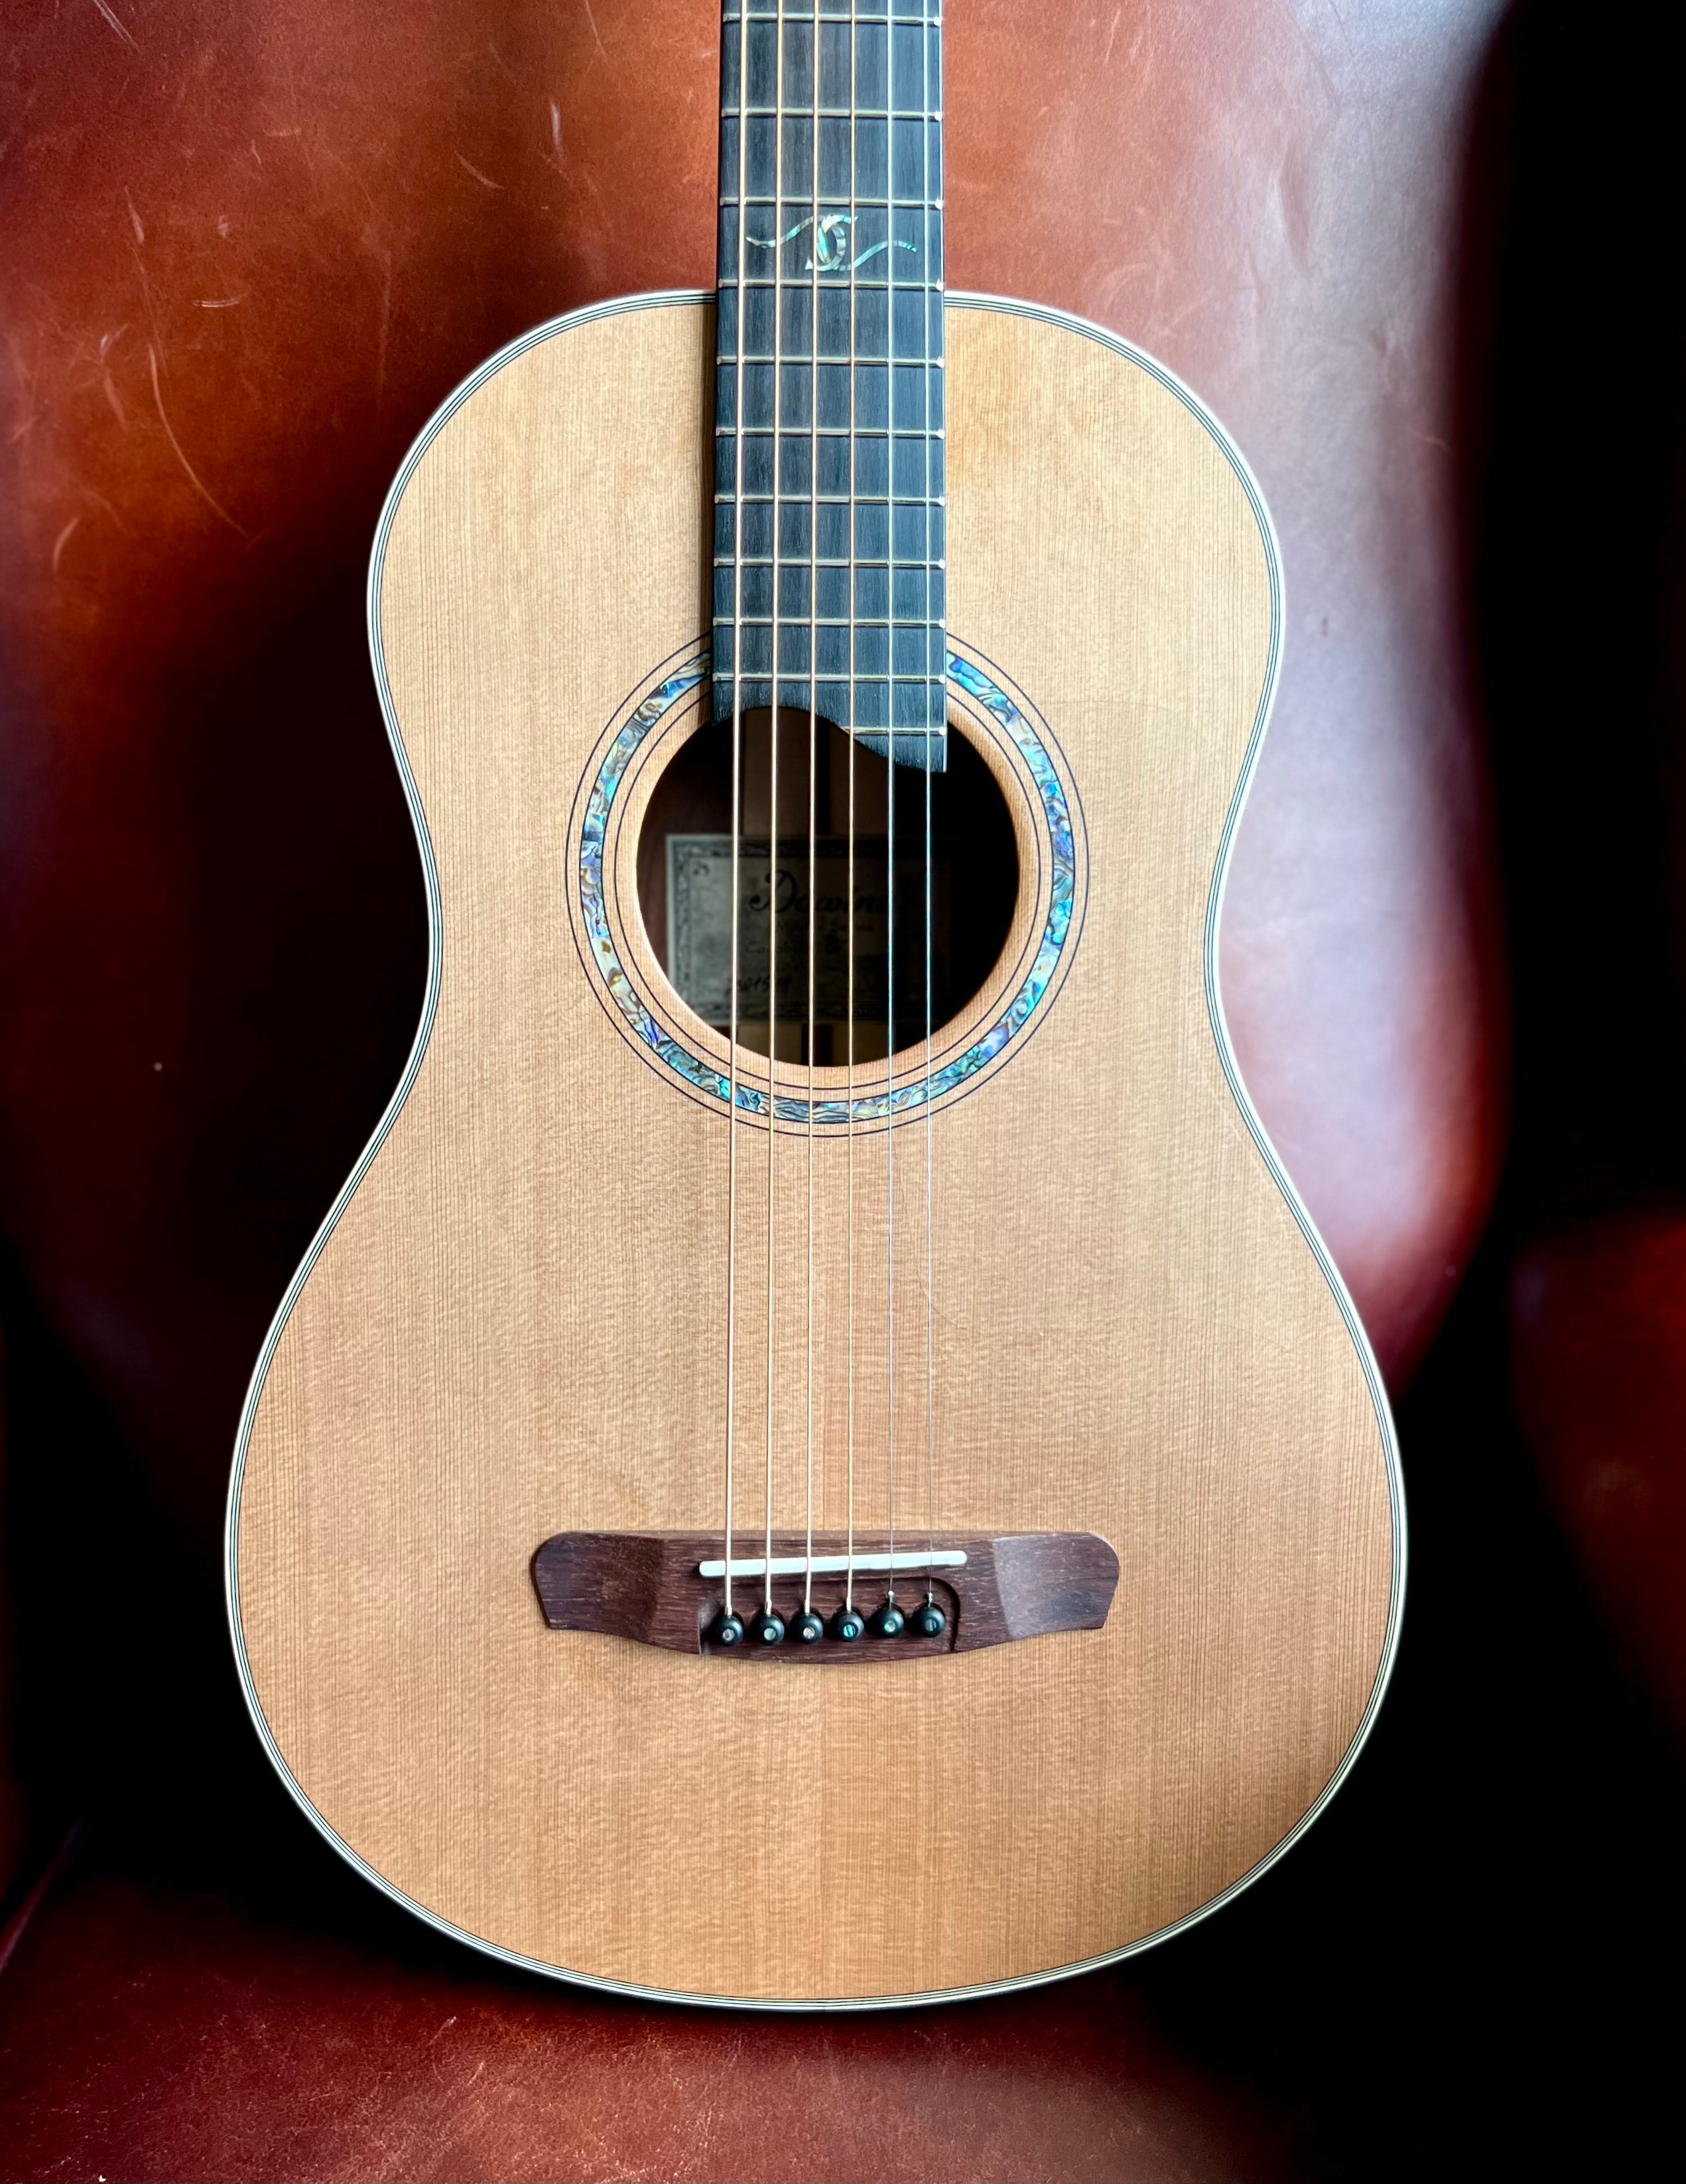 Dowina Cocobolo Trio Plate BV (Cocobolo III), Acoustic Guitar for sale at Richards Guitars.